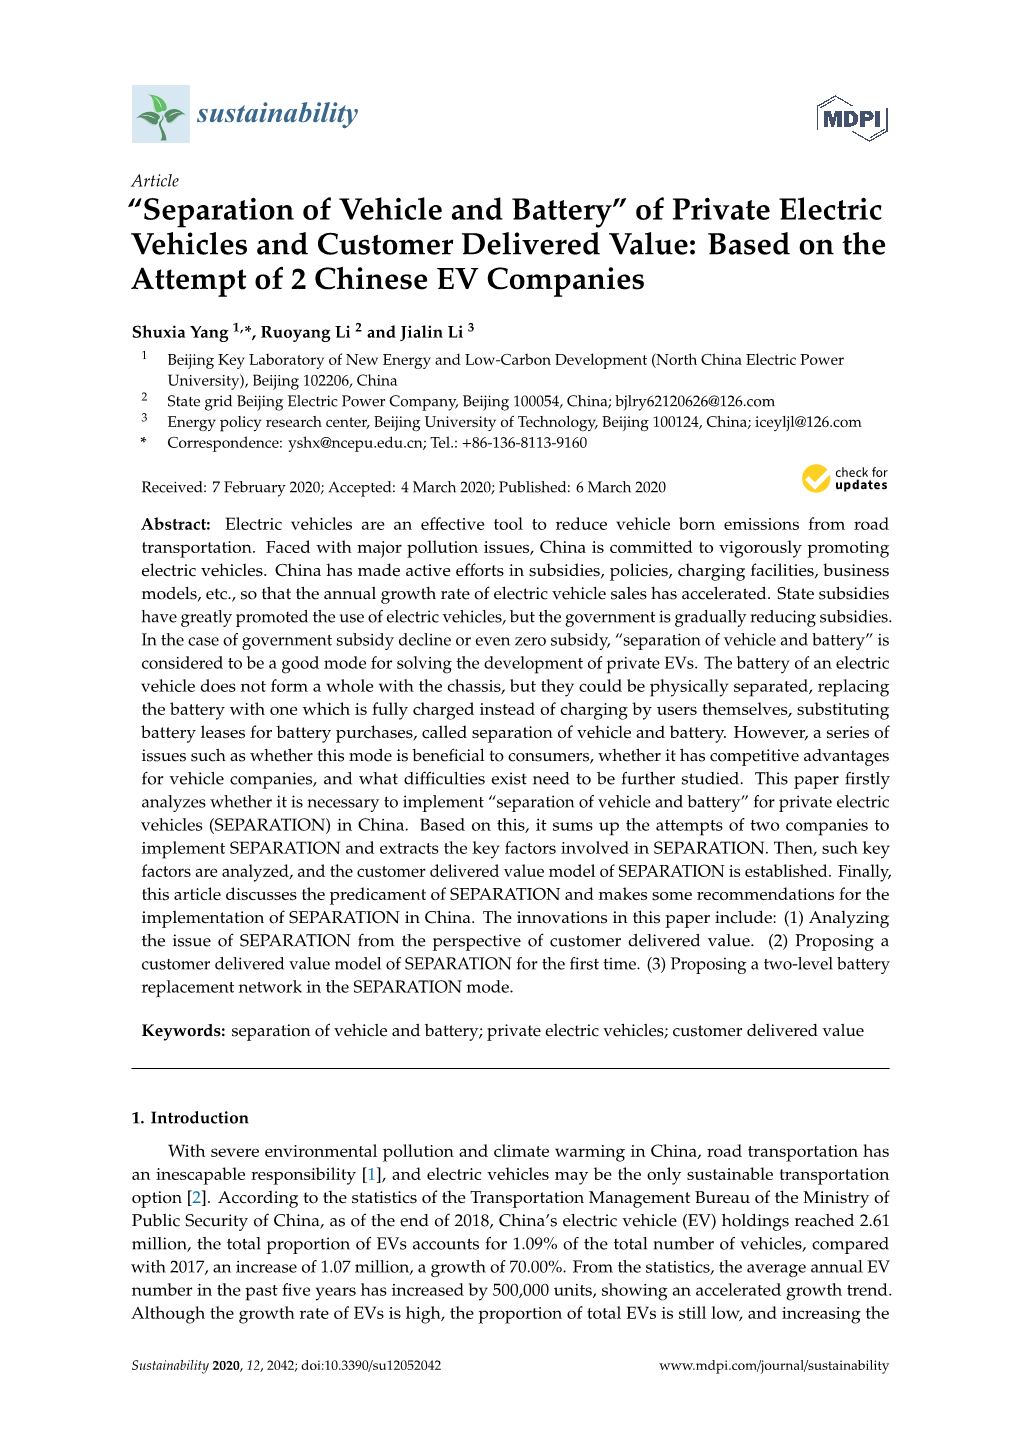 Separation of Vehicle and Battery” of Private Electric Vehicles and Customer Delivered Value: Based on the Attempt of 2 Chinese EV Companies